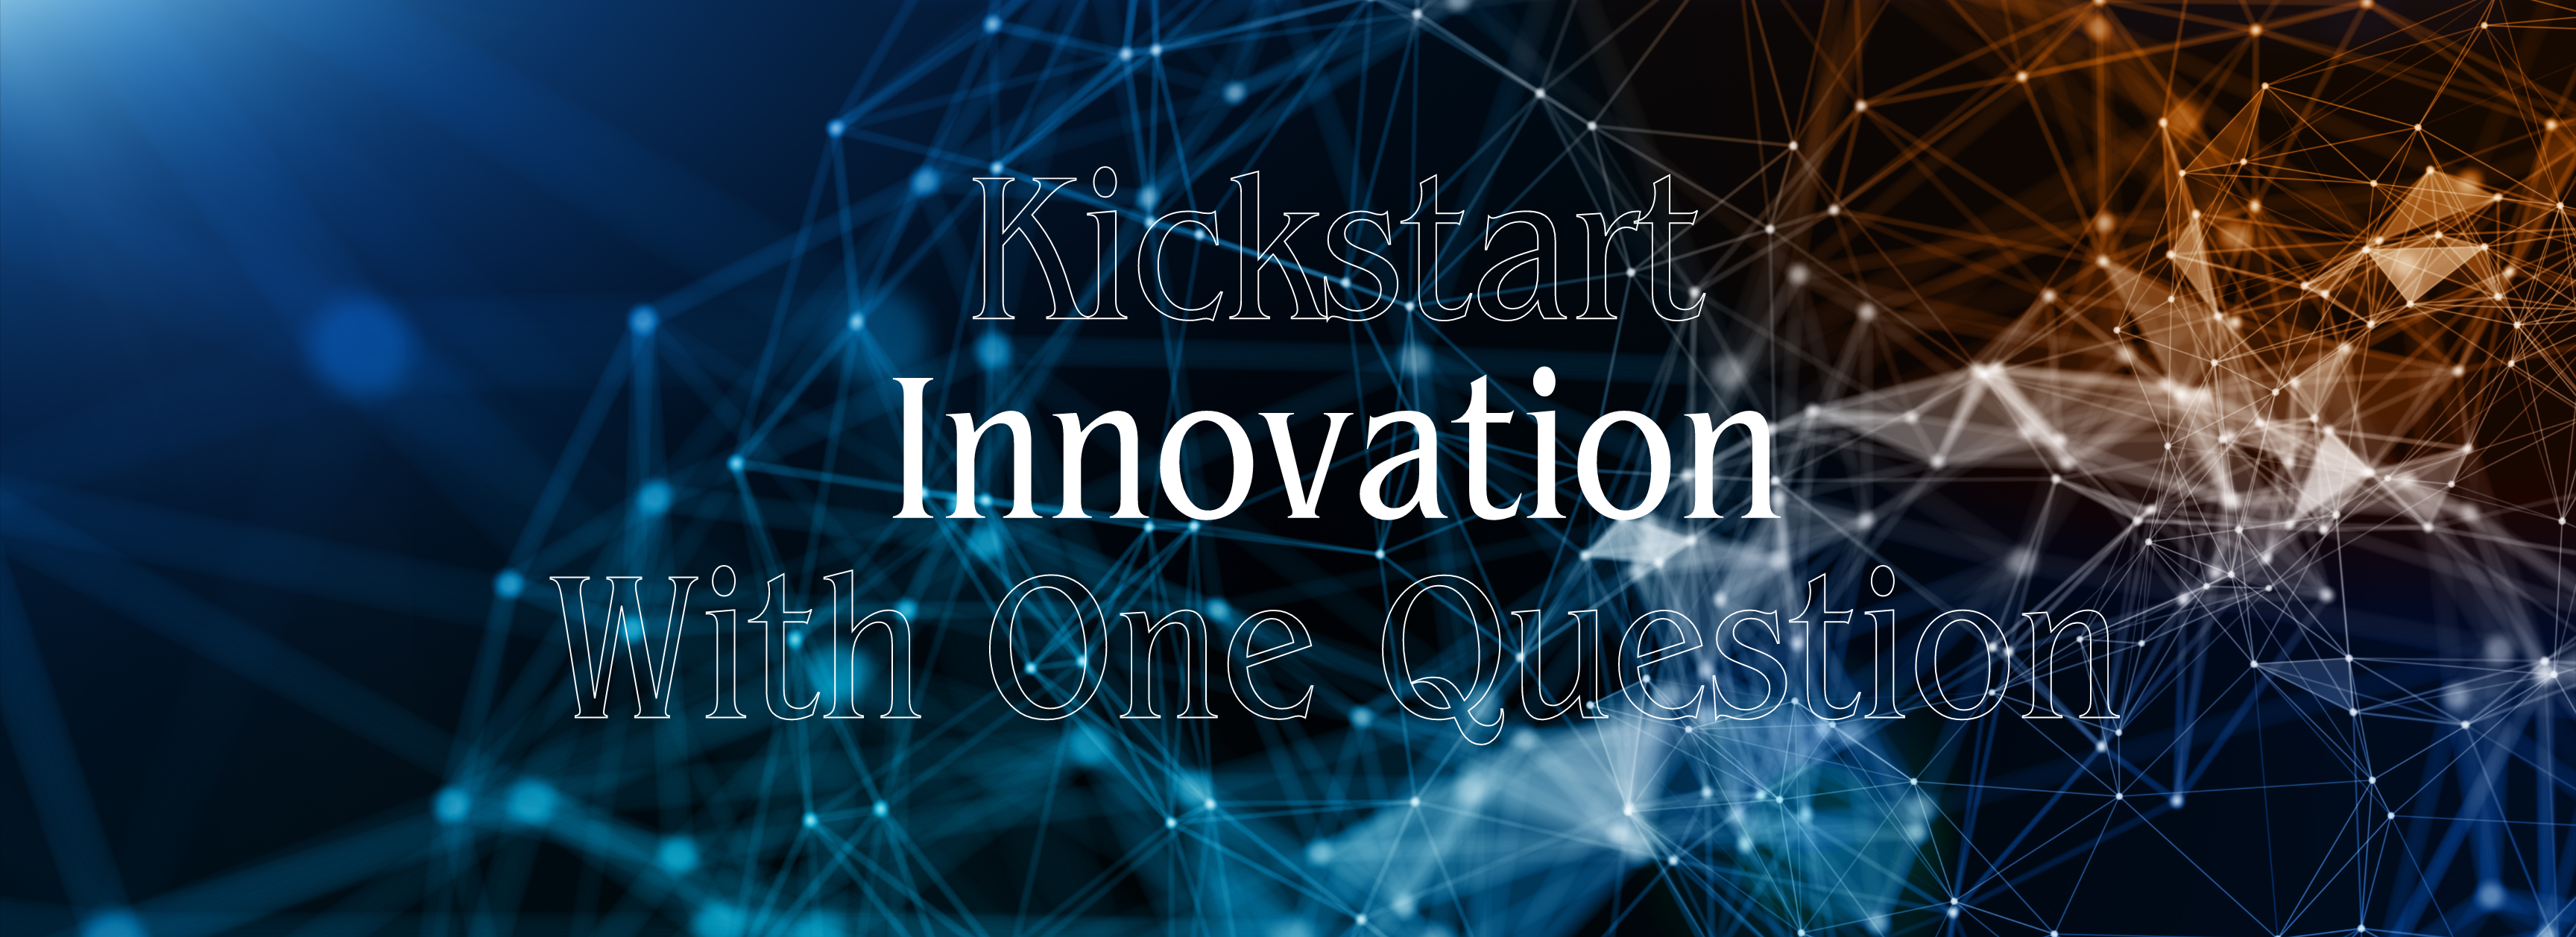 Kickstart Innovation with One Question